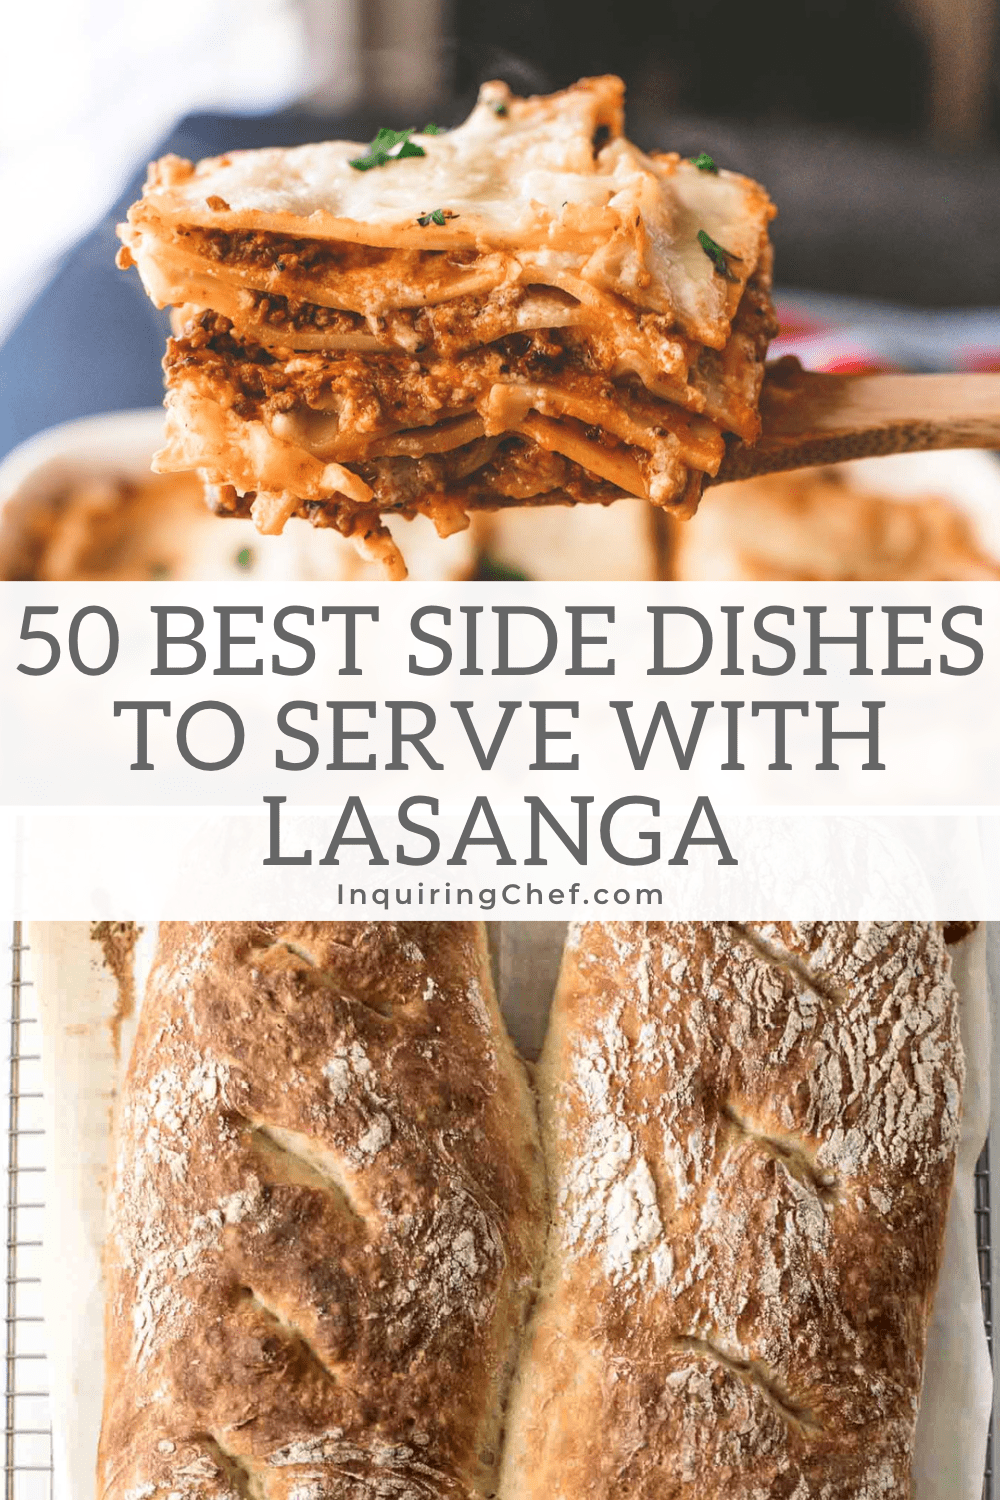 what to serve with lasagna